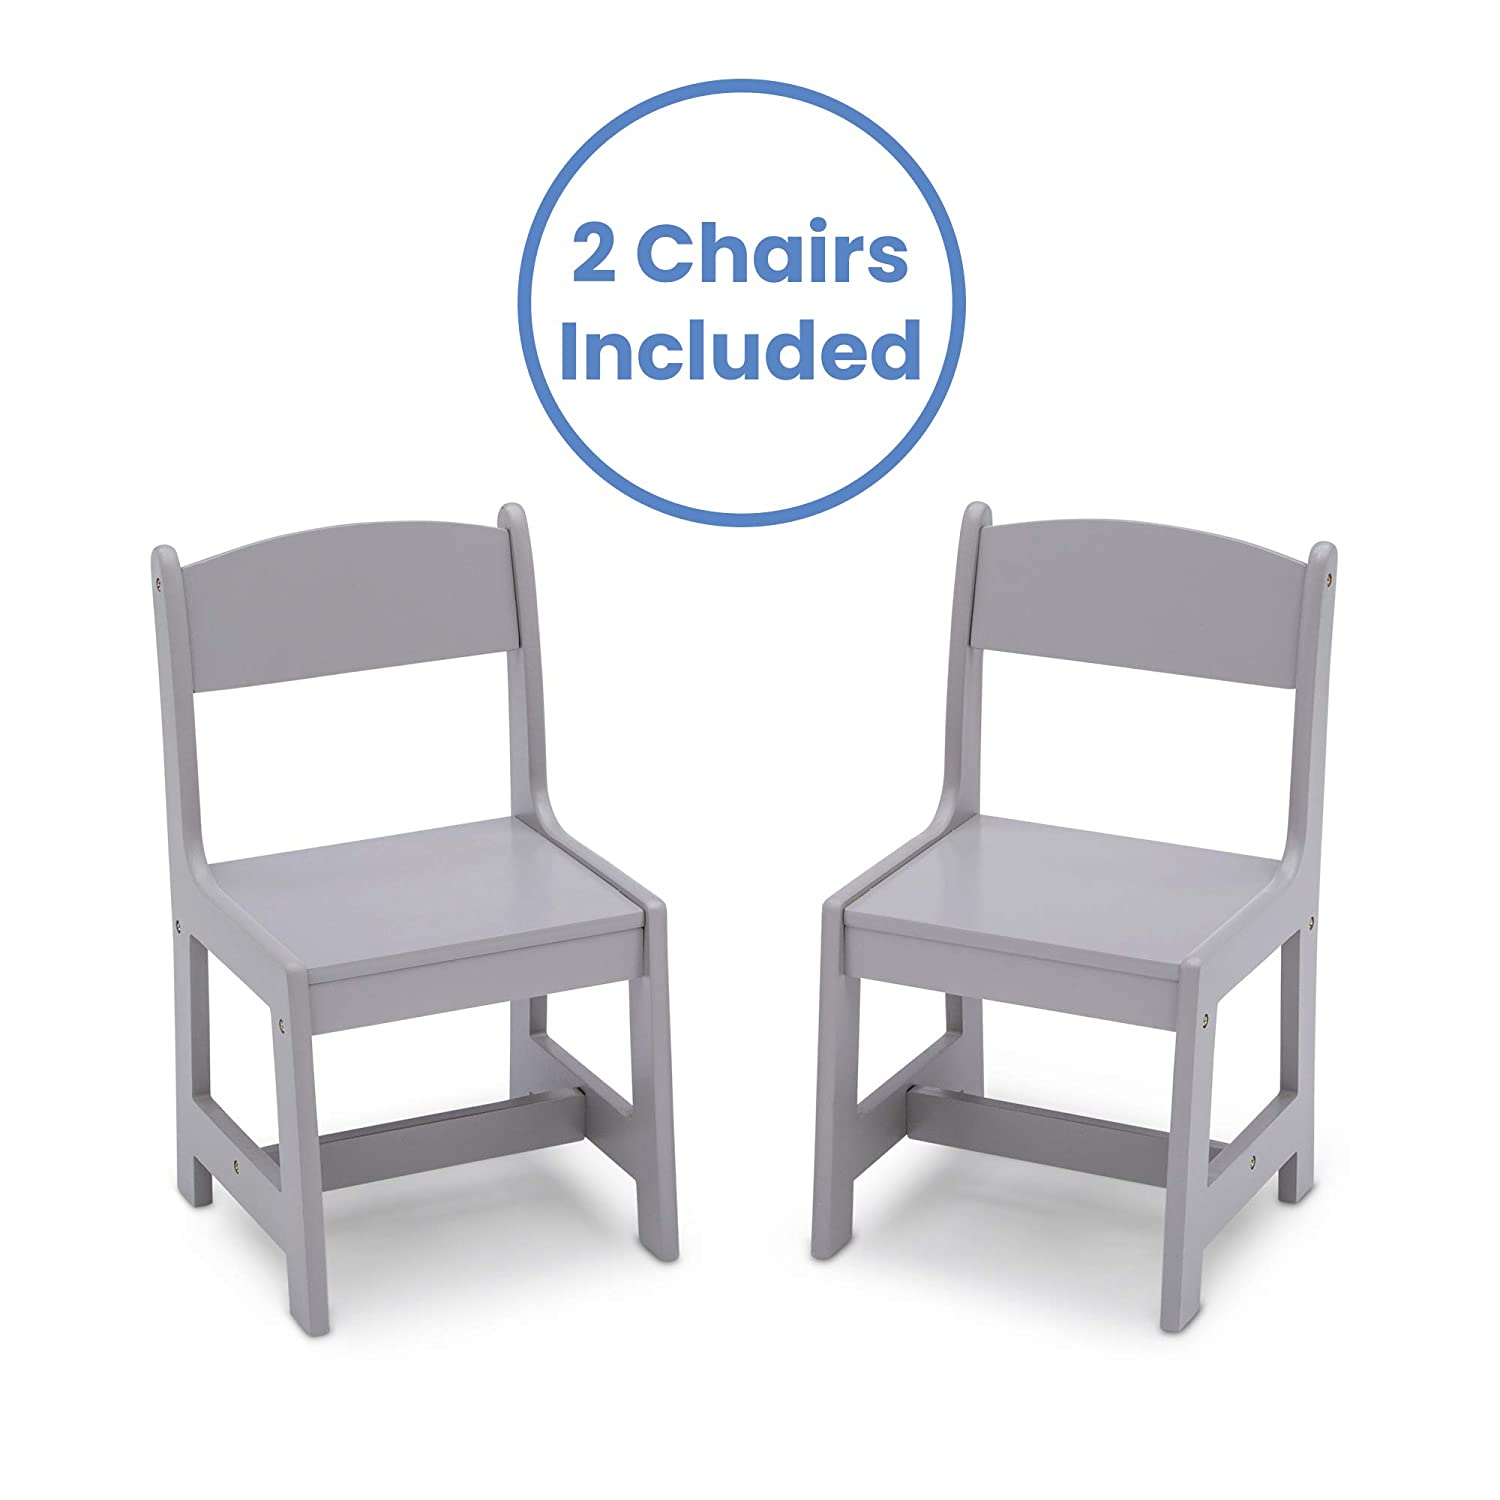 Delta Children MySize Kids Wood Table and Chair Set (2 Chairs Included) - Ideal for Arts & Crafts, Snack Time, Homeschooling, Homework & More, Grey